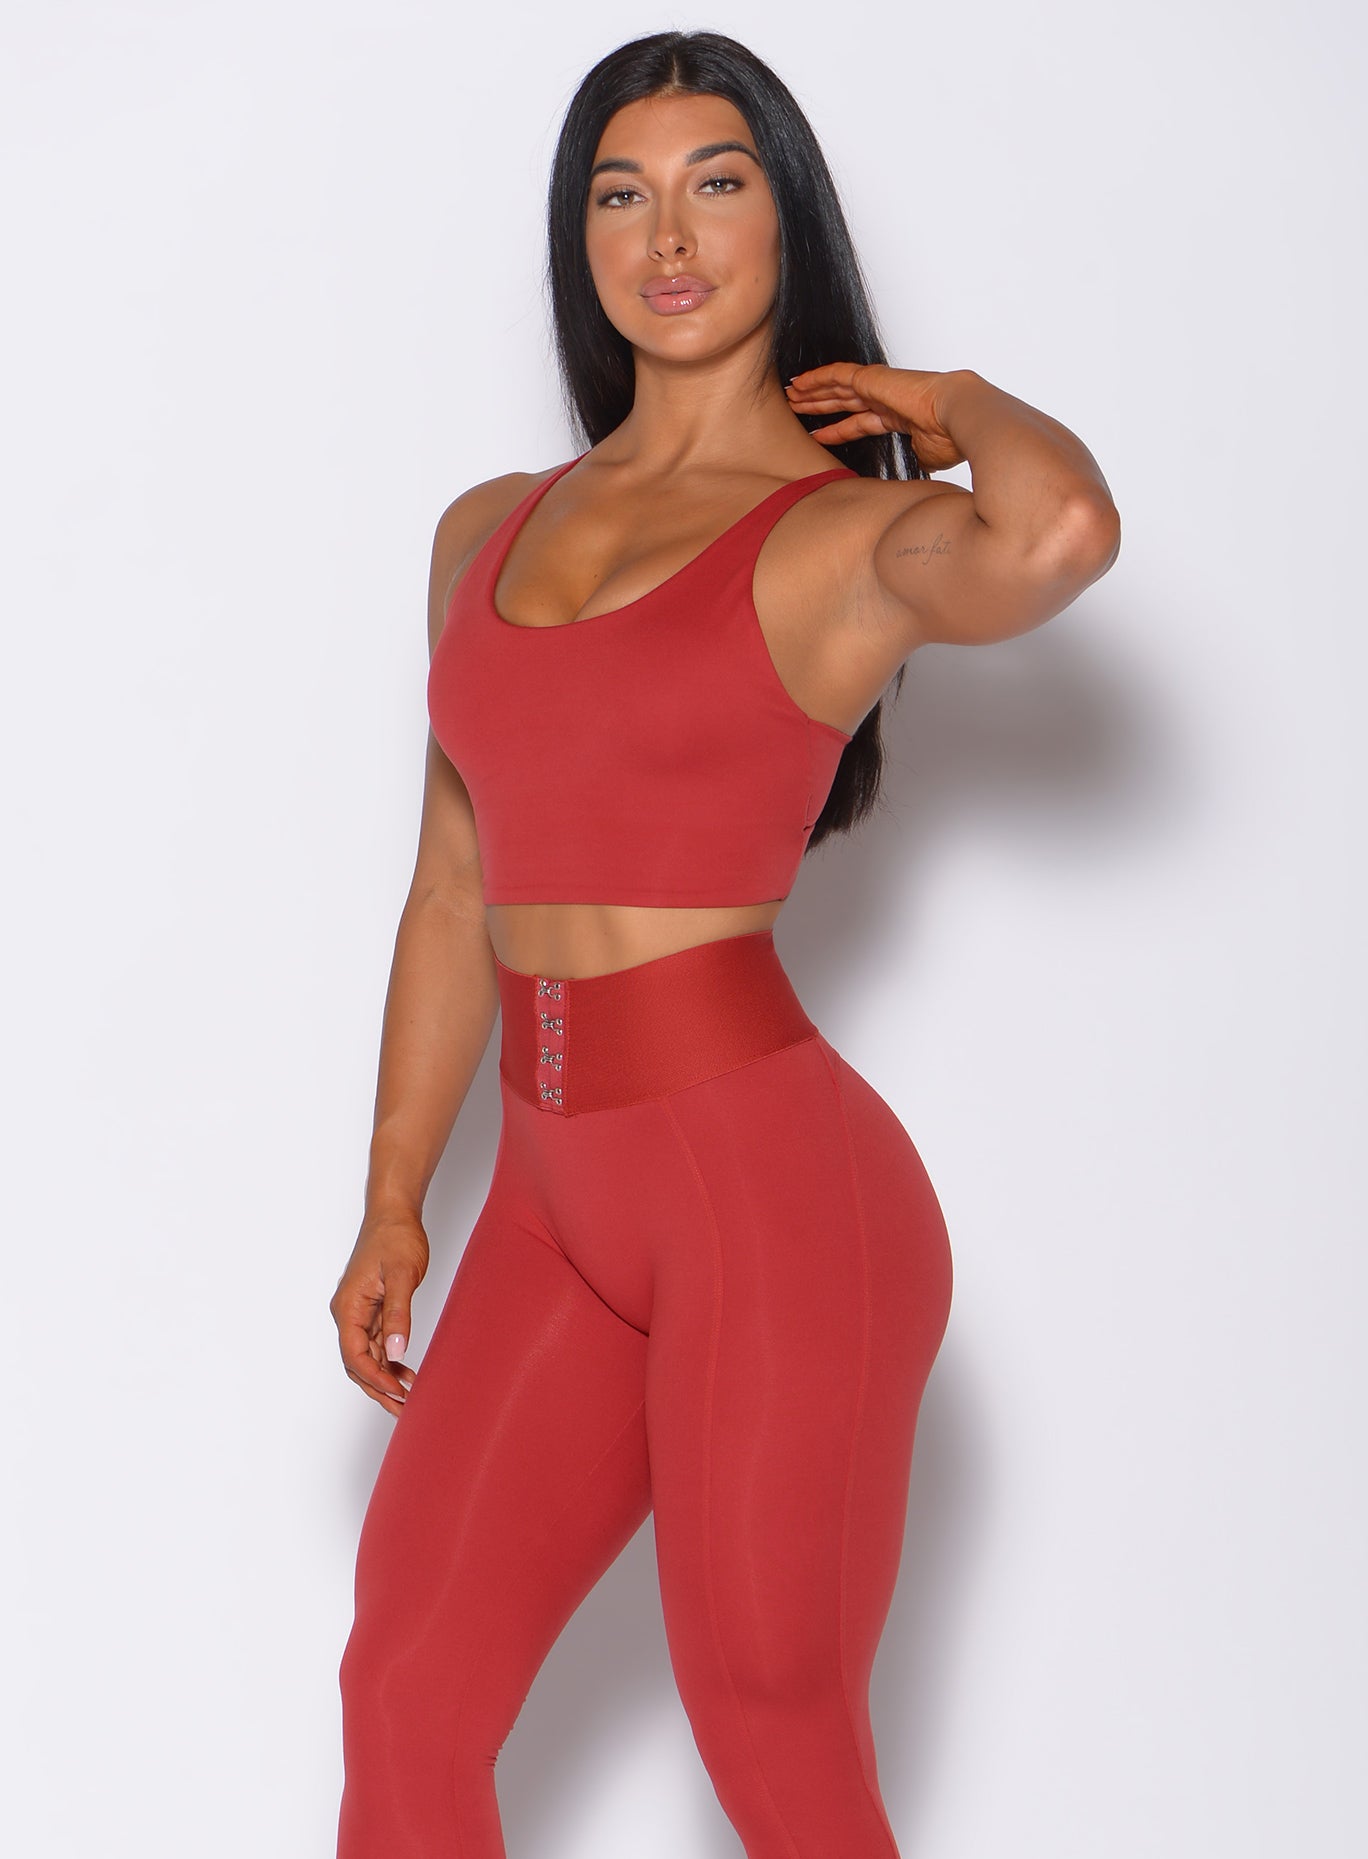 Model facing for ward wearing our impact sports bra in sunset red and a matching leggings 